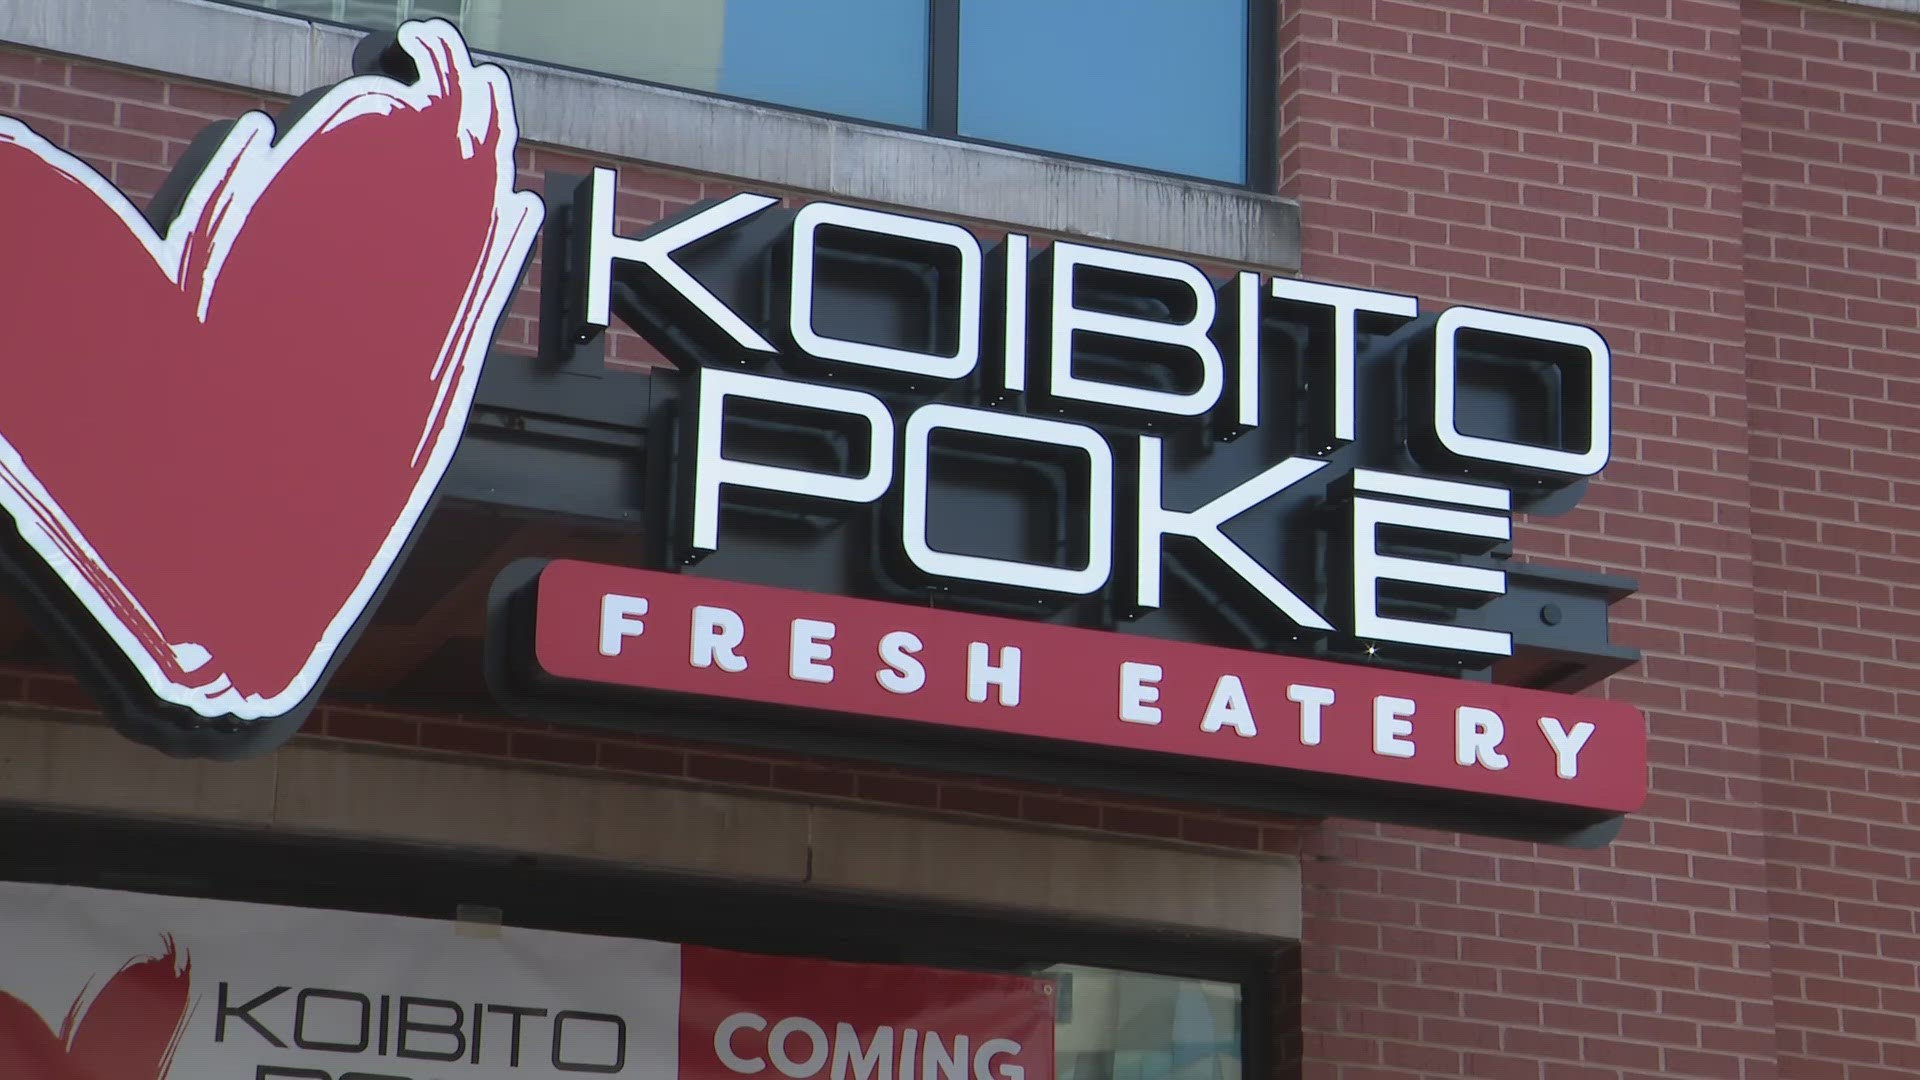 A new restaurant opened its doors in Ballpark Village just in time for Cardinals opening day! Koibito Poké opened Wednesday.